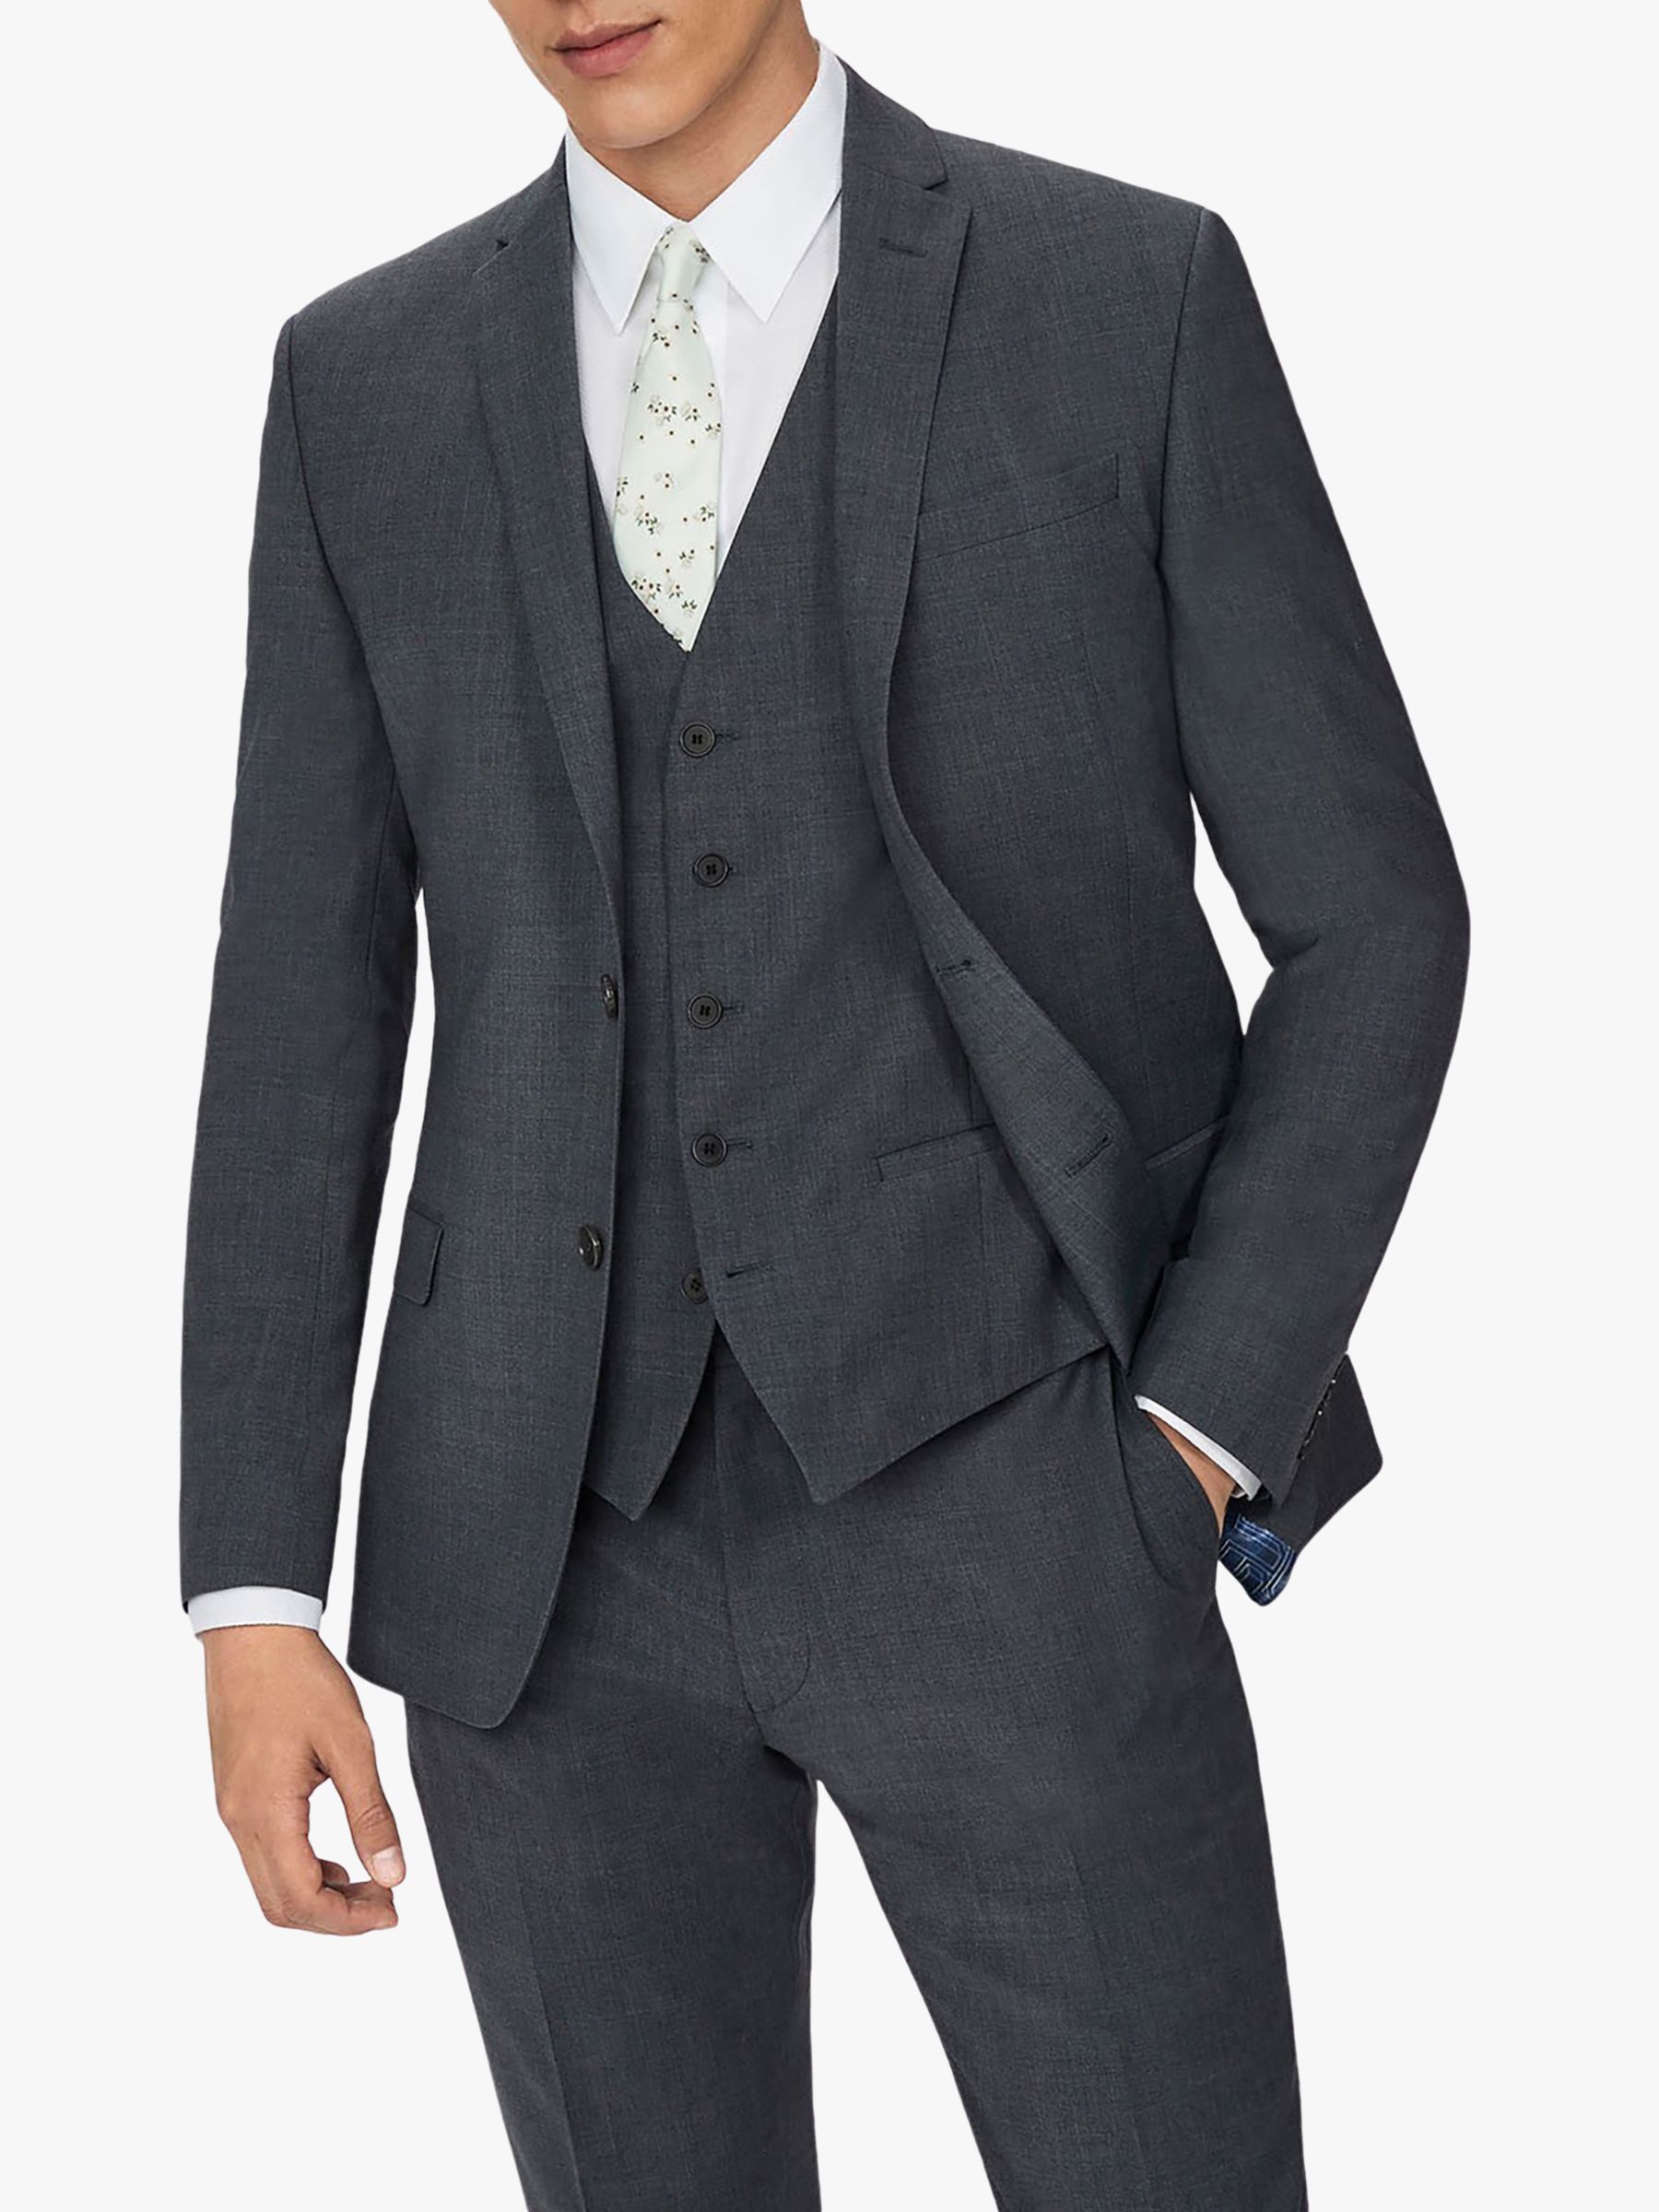 Ted Baker Panama Wool Blend Suit Jacket, Charcoal, 38S